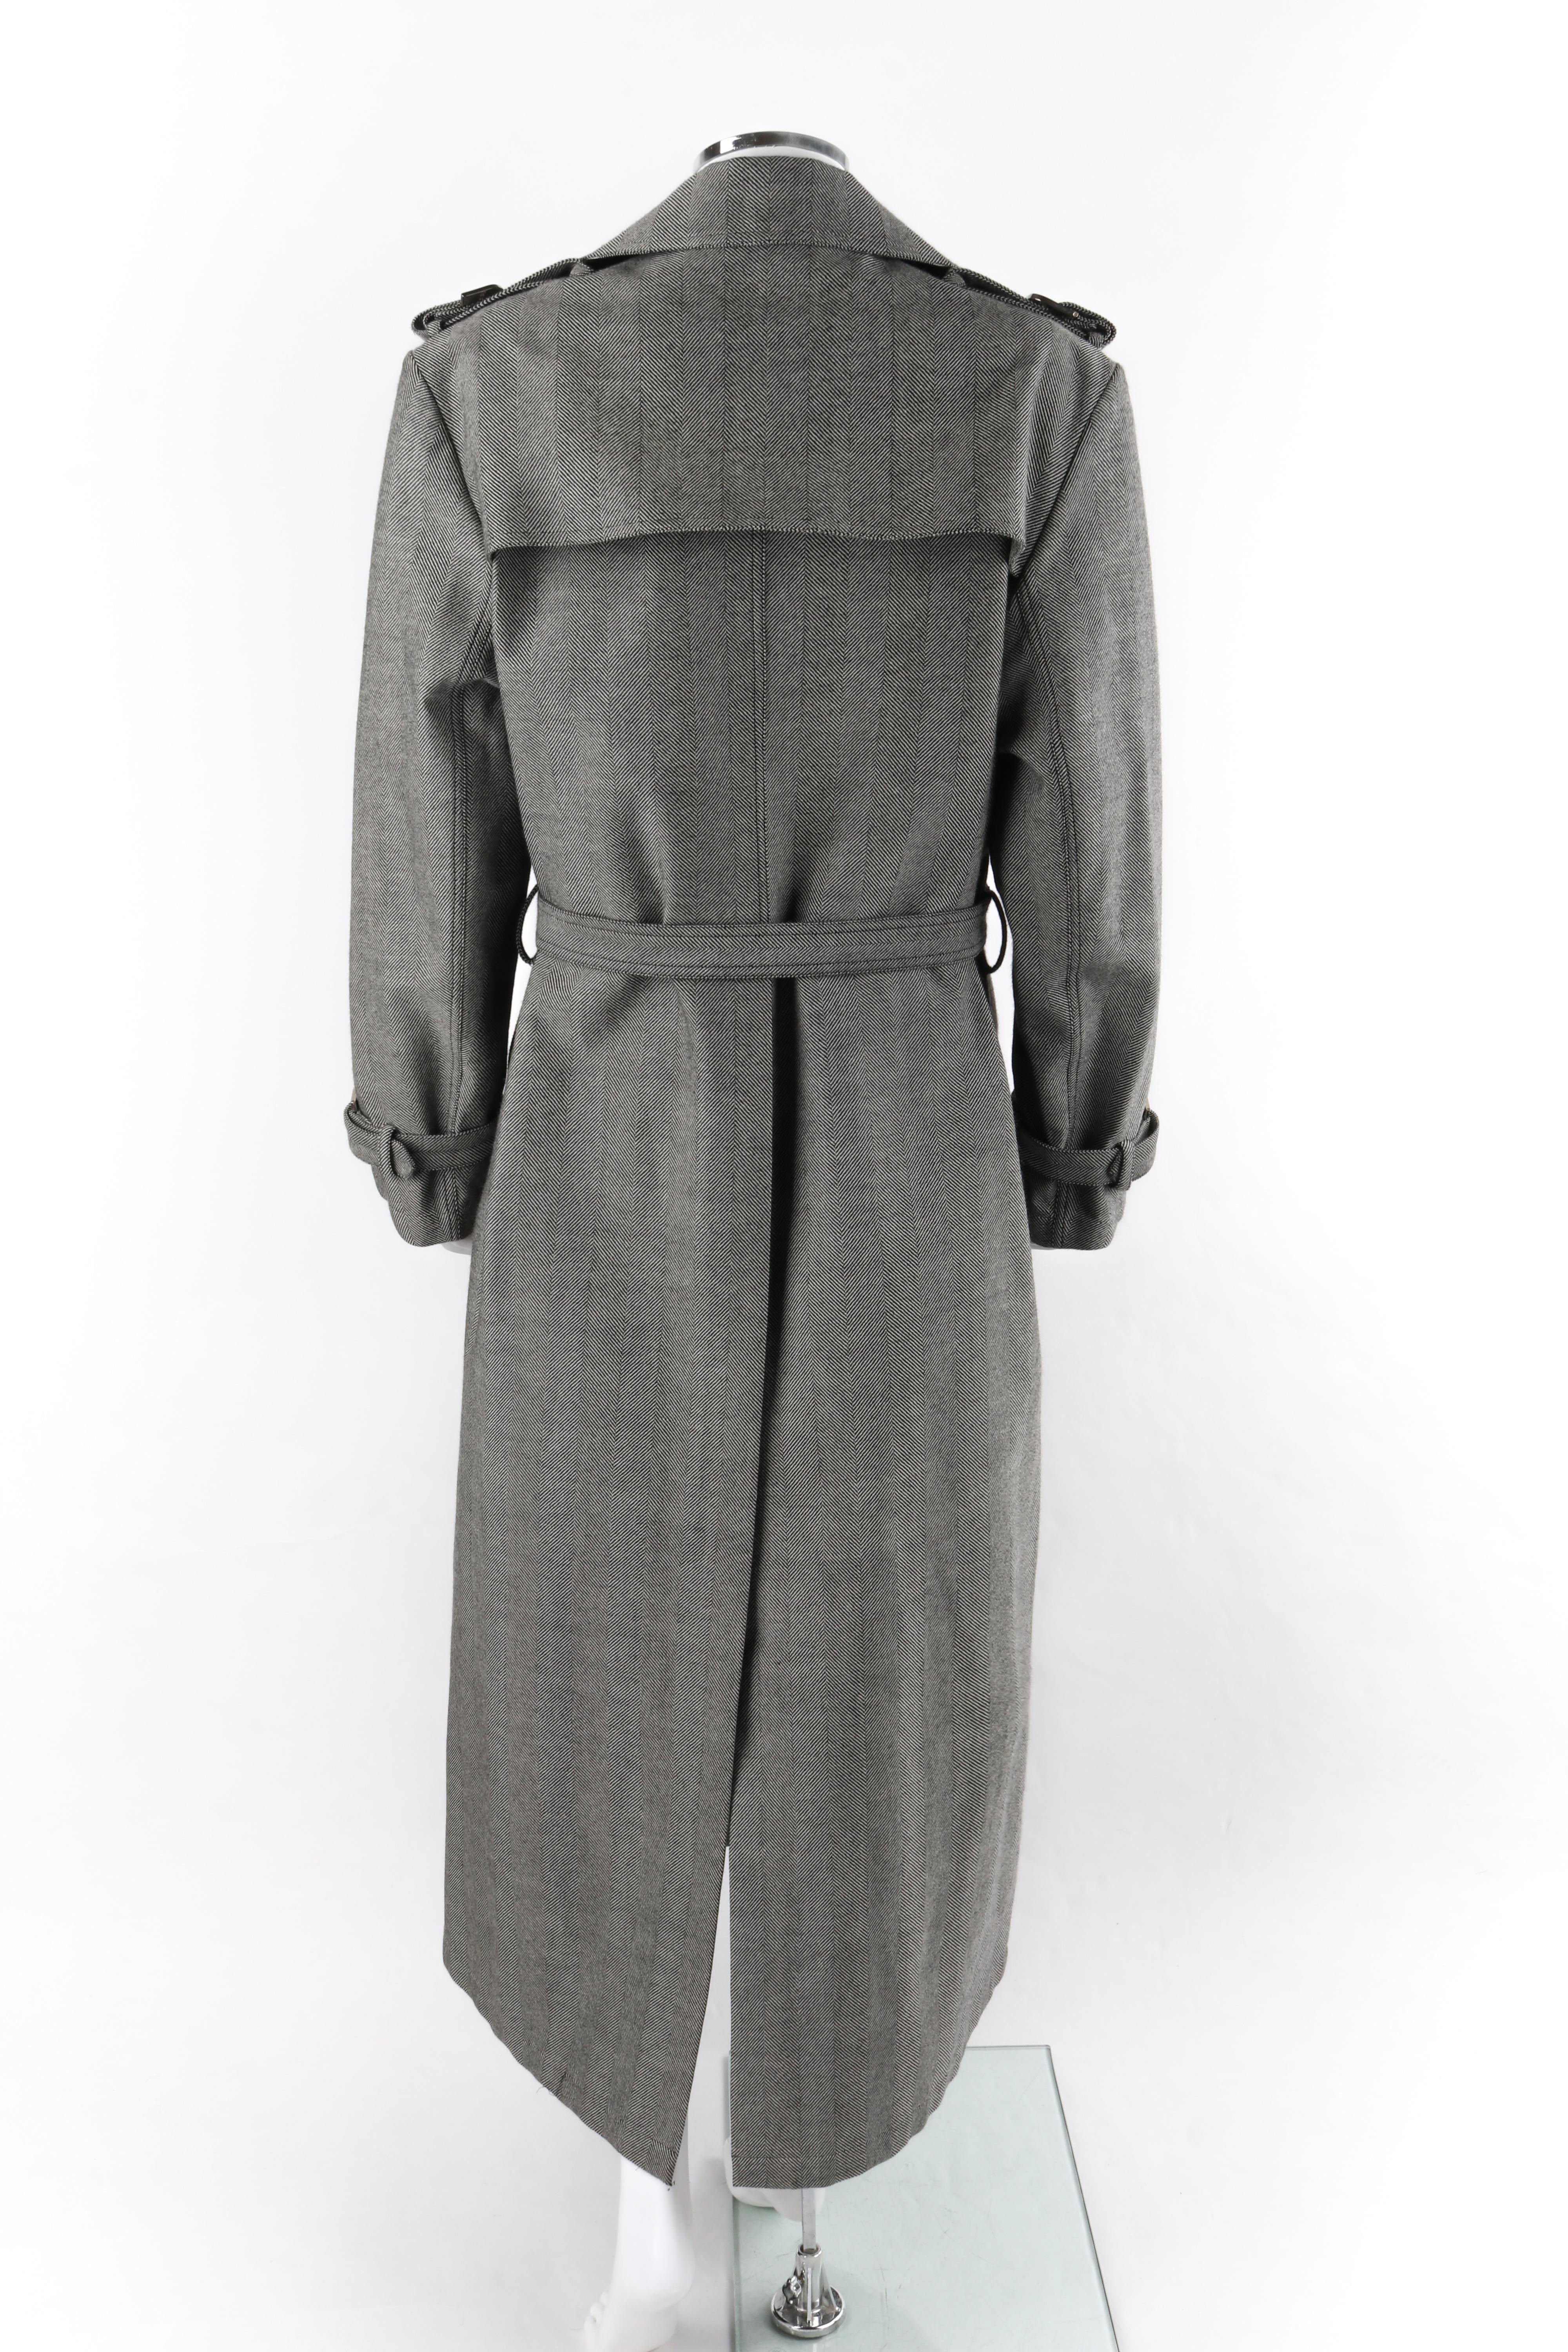 Women's CHRISTIAN DIOR Boutique c.2000’s Herringbone Double Breasted Belted Trench Coat